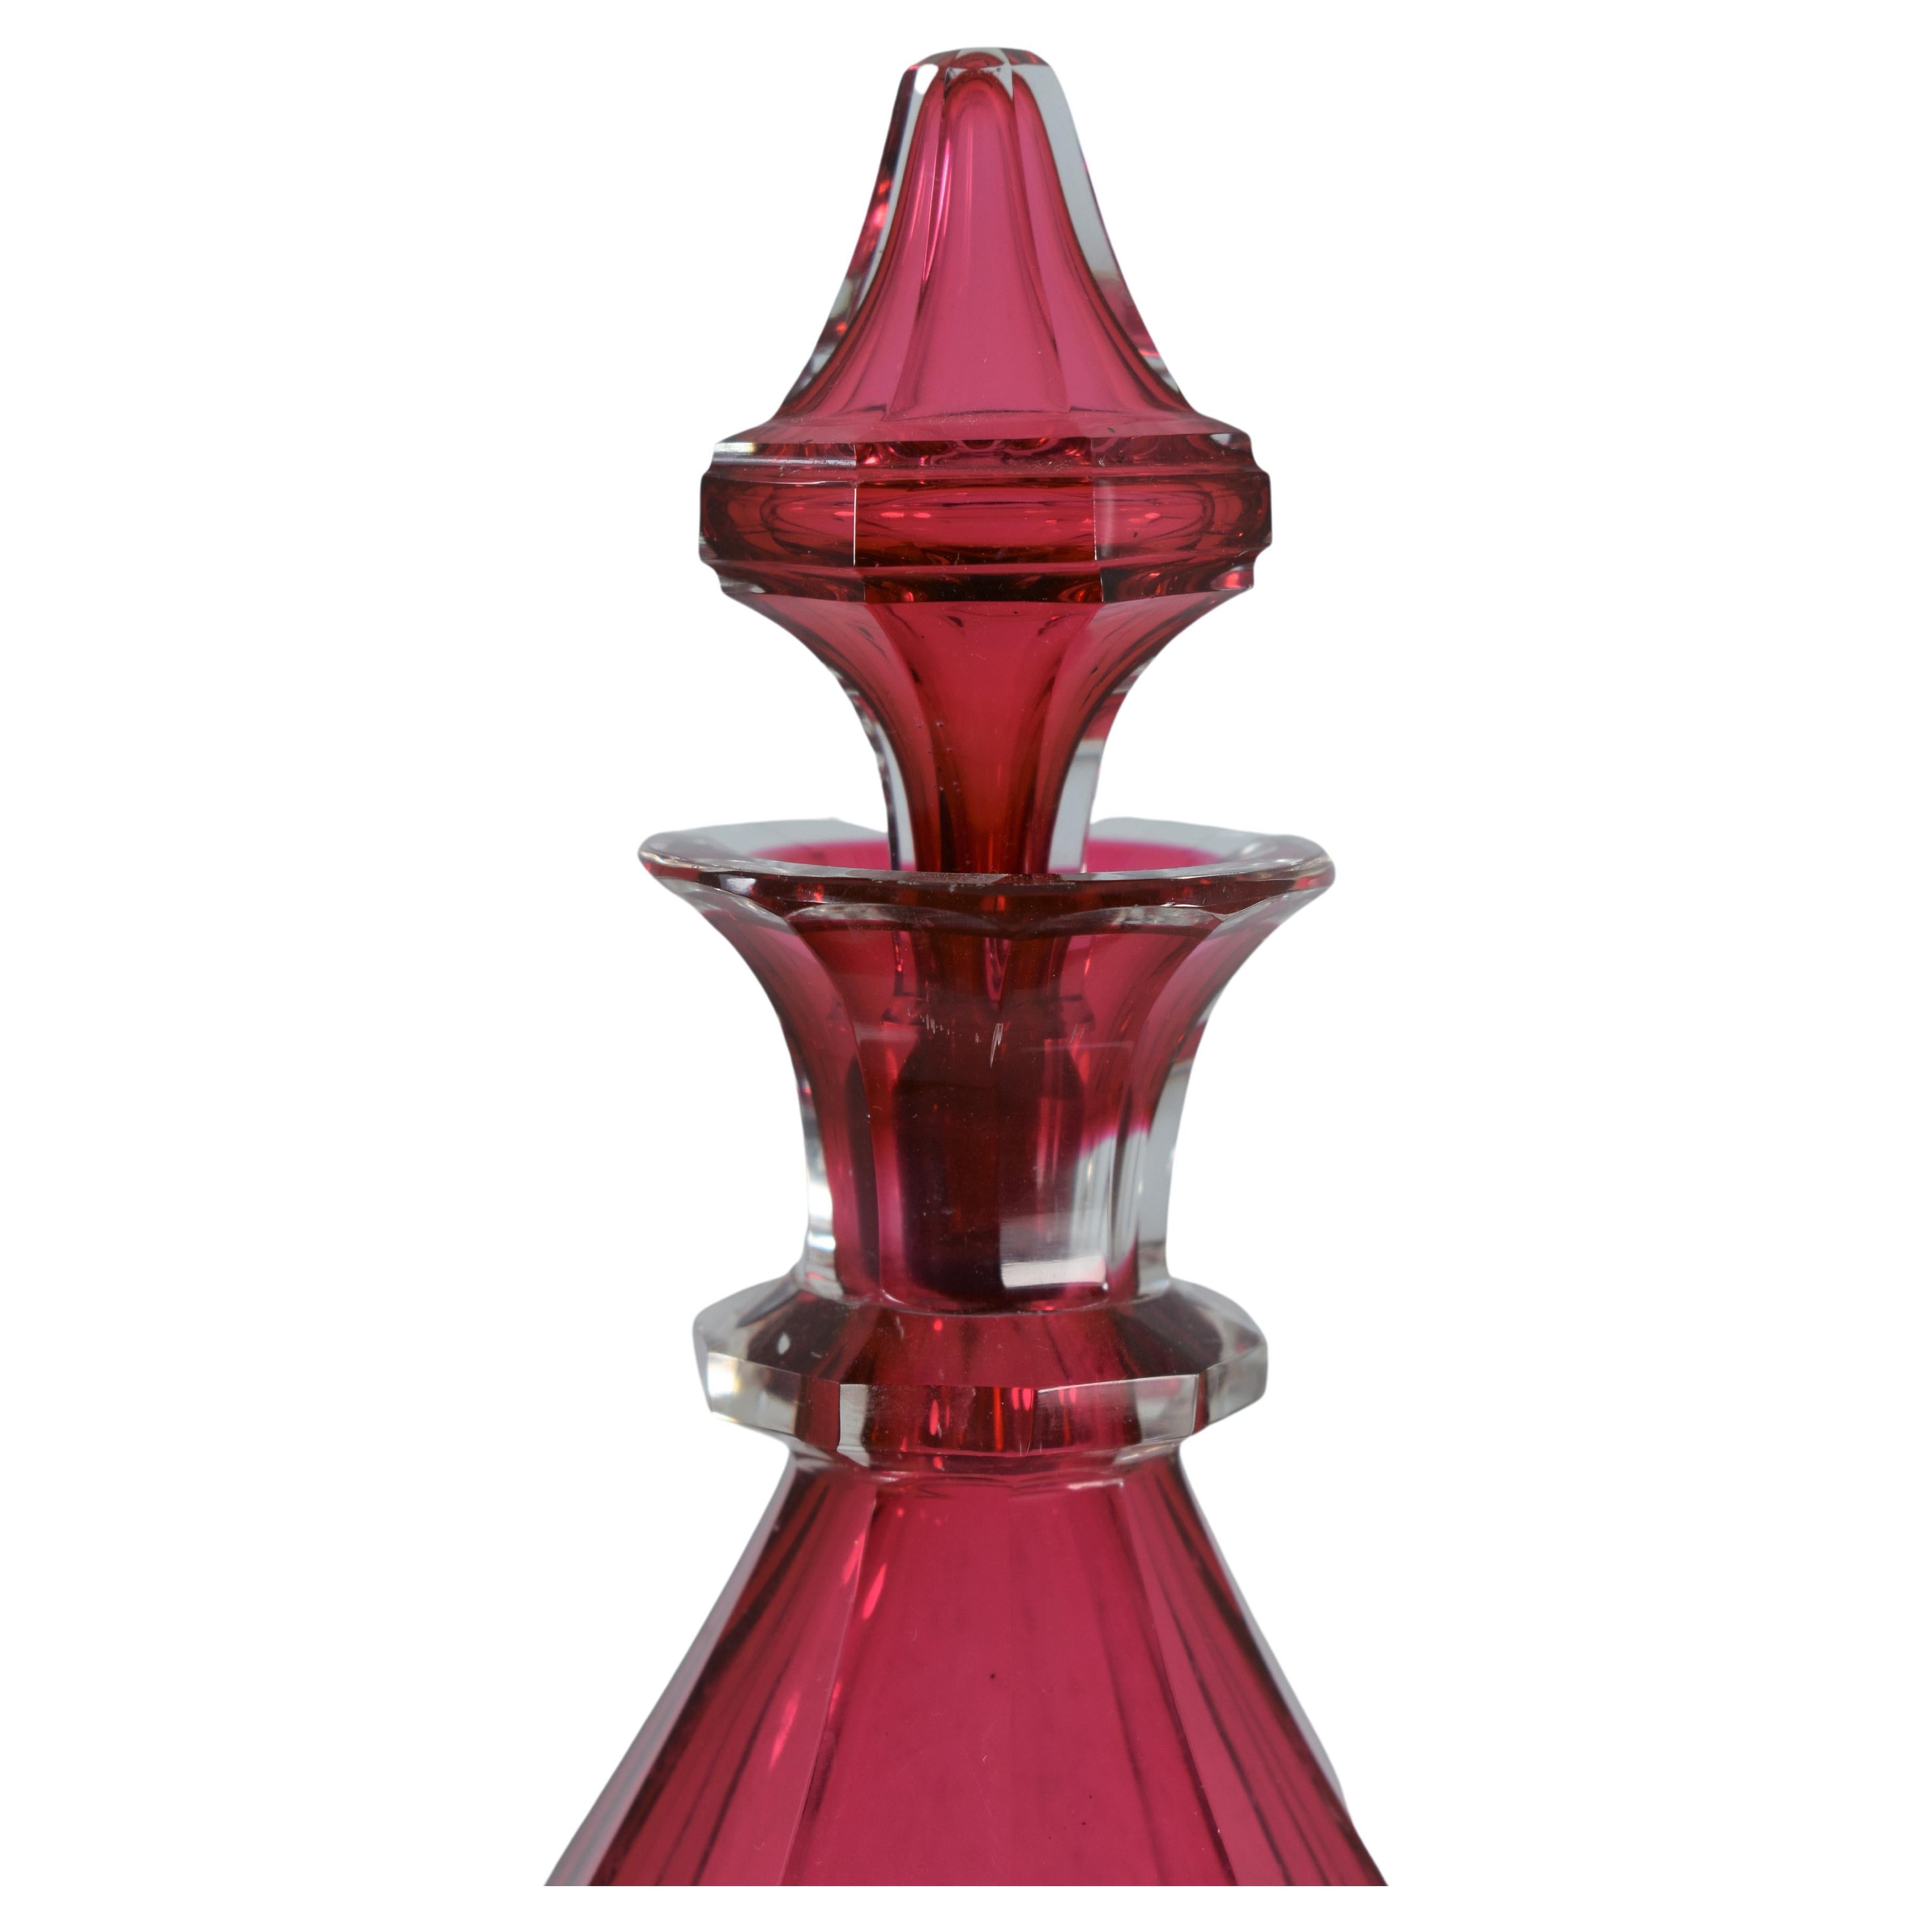 Hand-Crafted Antique Bohemian Cranberry Glass Perfume Bottle, 19th Century For Sale